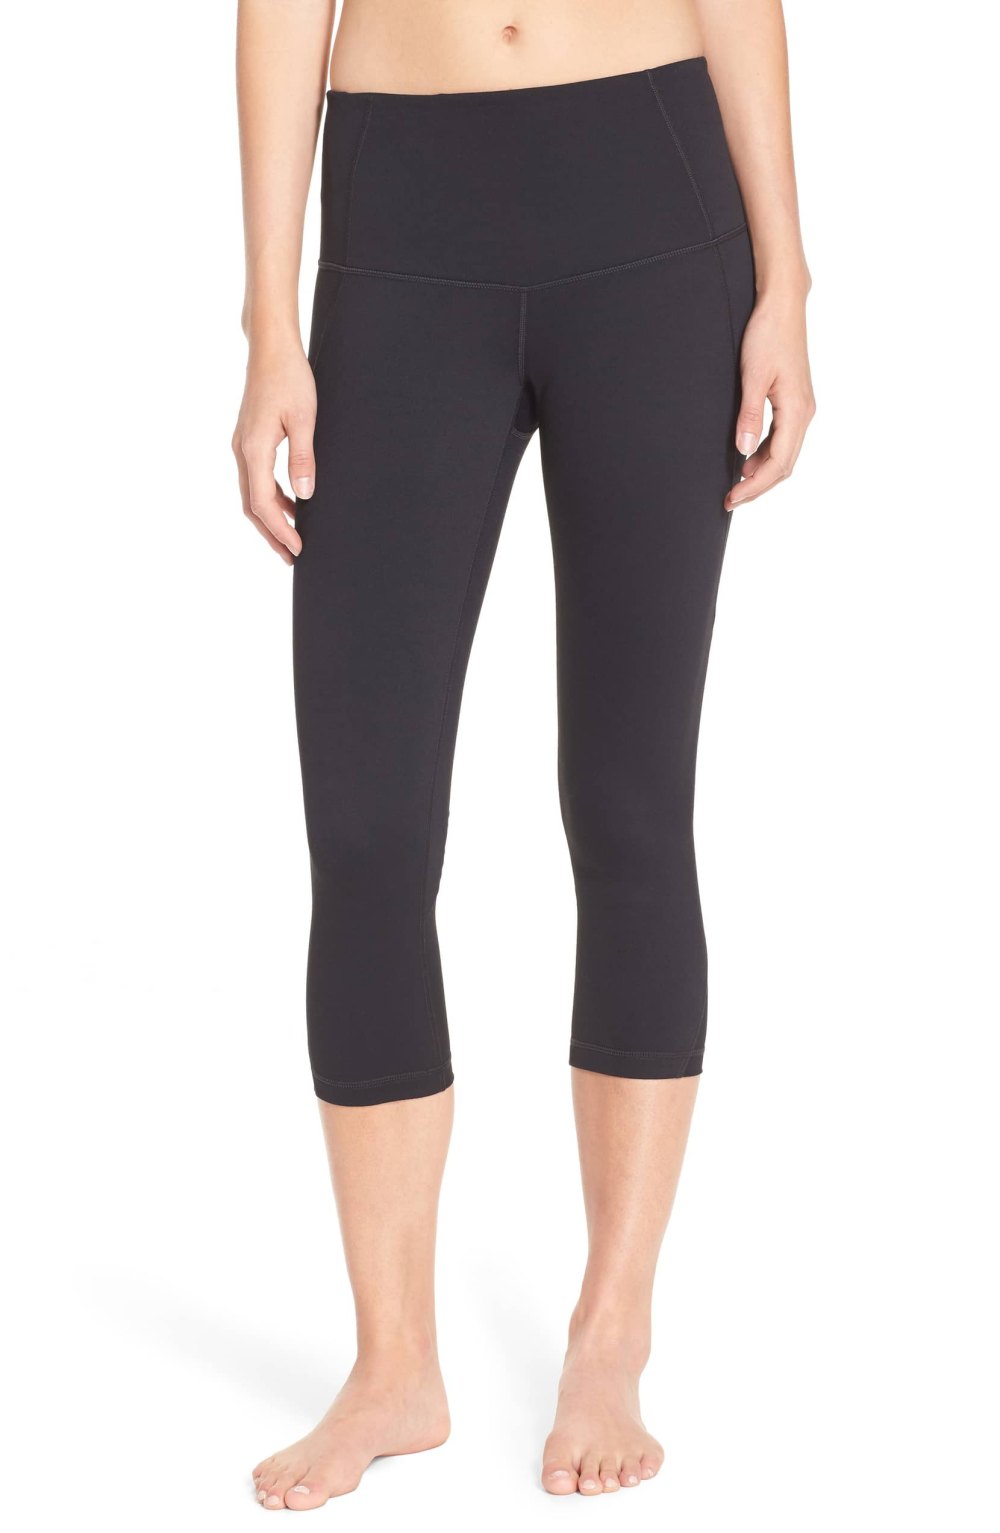 Live In leggings by Zella, an In-house Nordstrom Brand